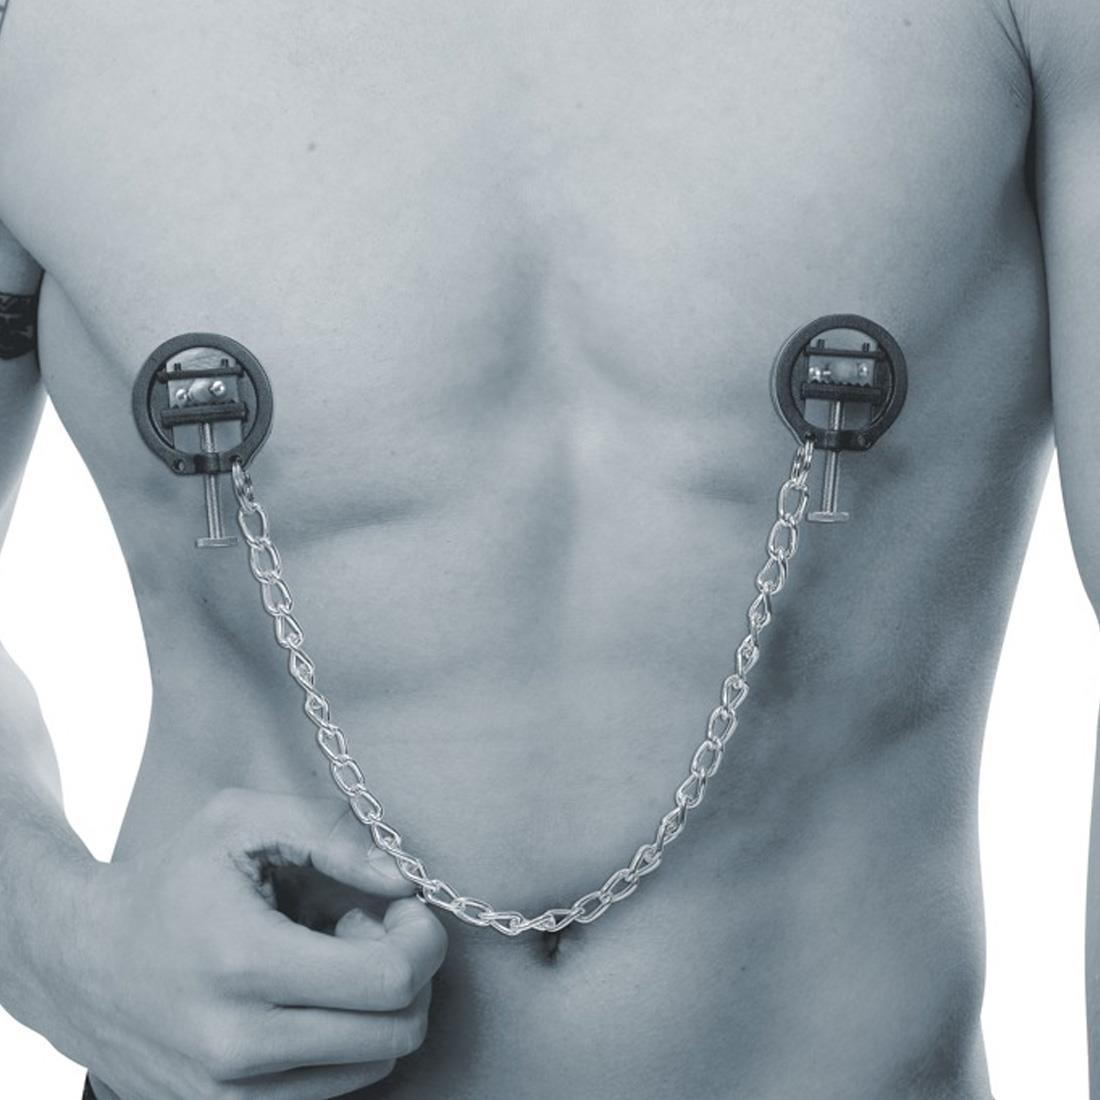 Round Screw Nipple Clamps with Metal Chain from Fetish Collection.